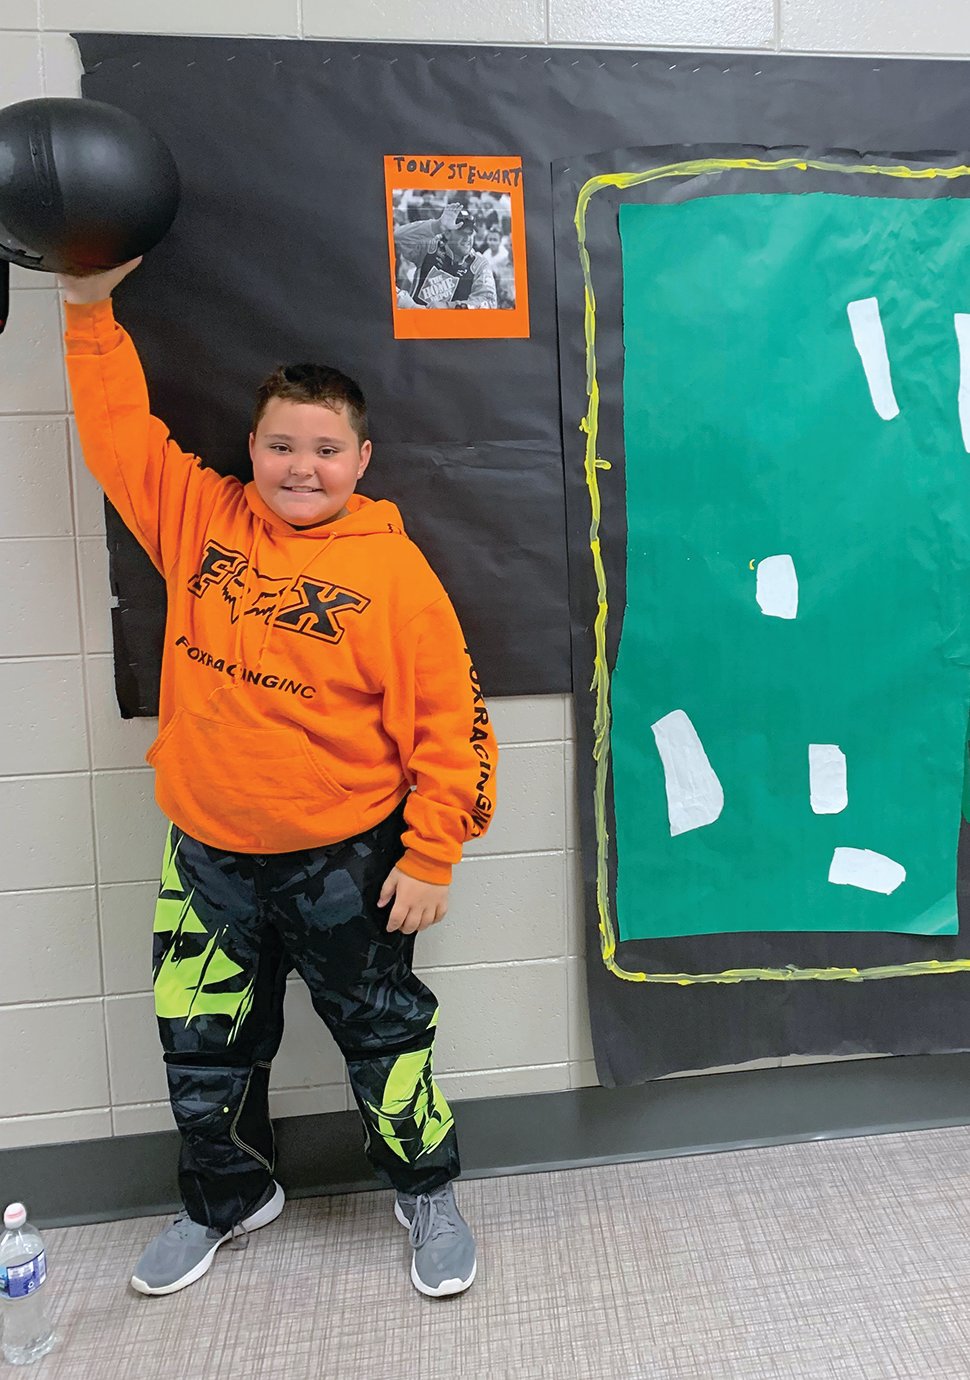 A wax figure of famous racecar drive Tony Stewert, also known as Pleasant Hill fourth grader Anthony Narmi, made his presence felt Friday at the elementary school. Official reports indicate Narmi